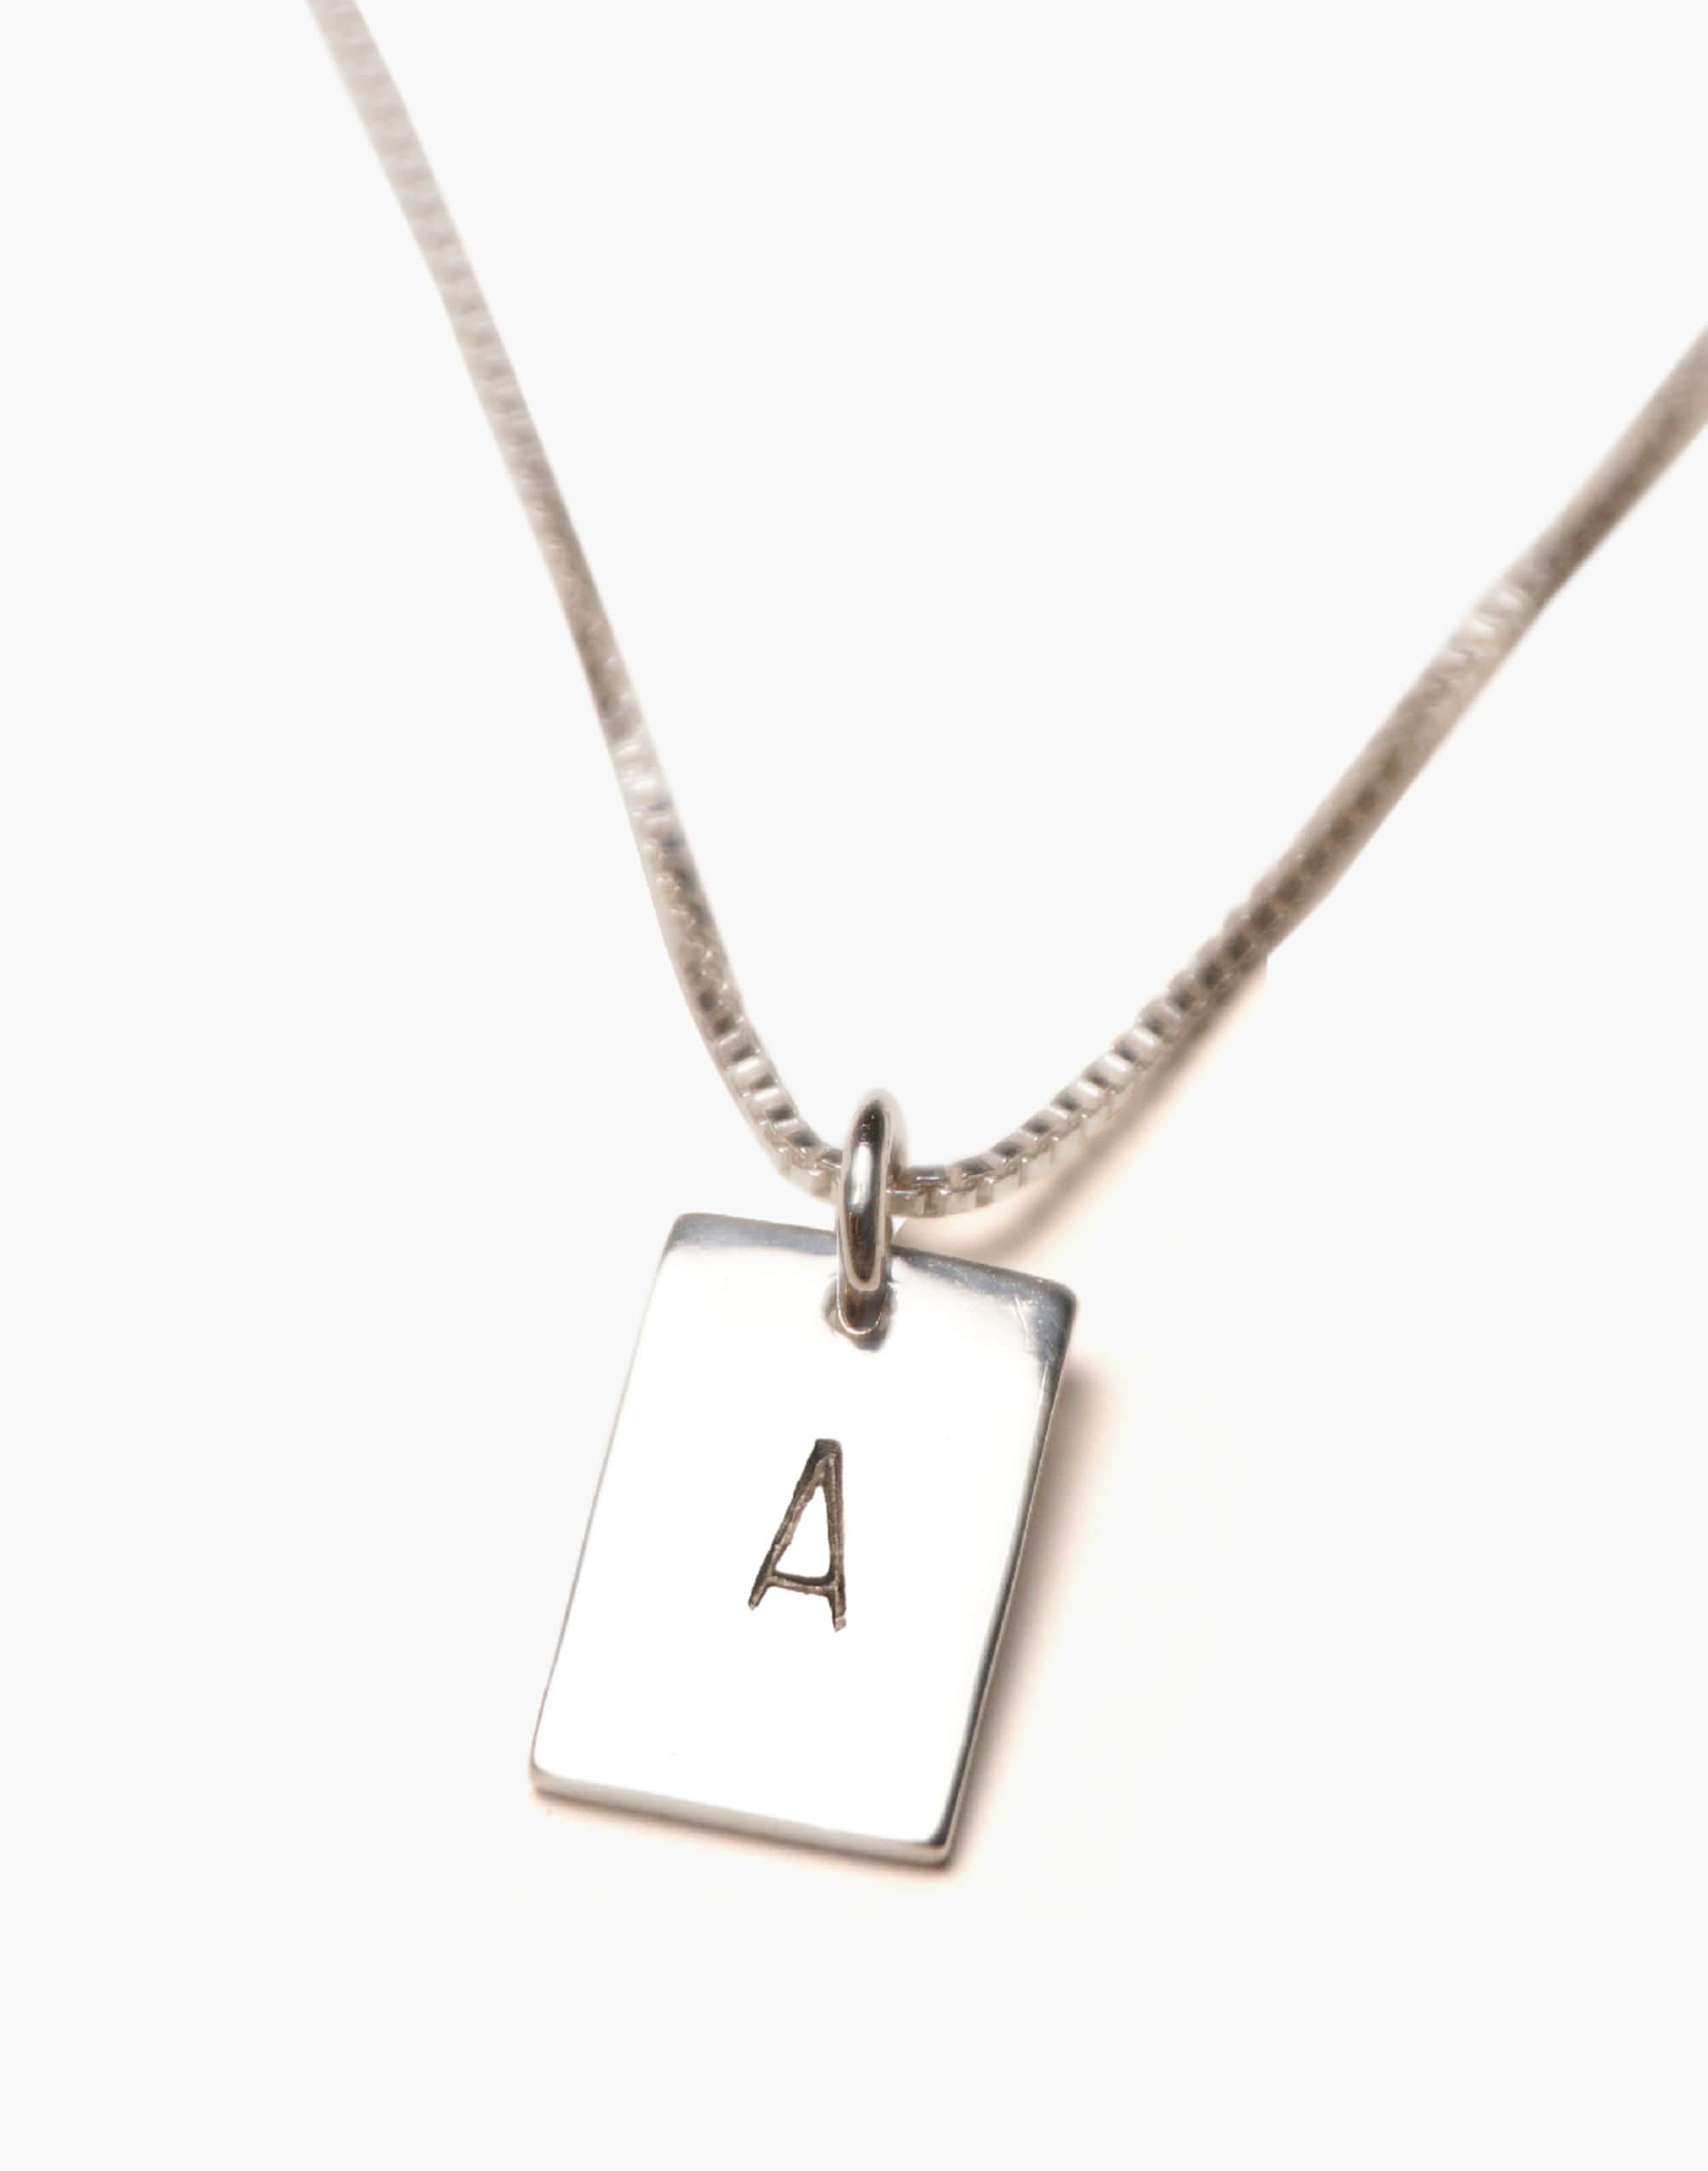 CHARLOTTE CAUWE STUDIO Letter Stamp Tag Necklace in Sterling Silver